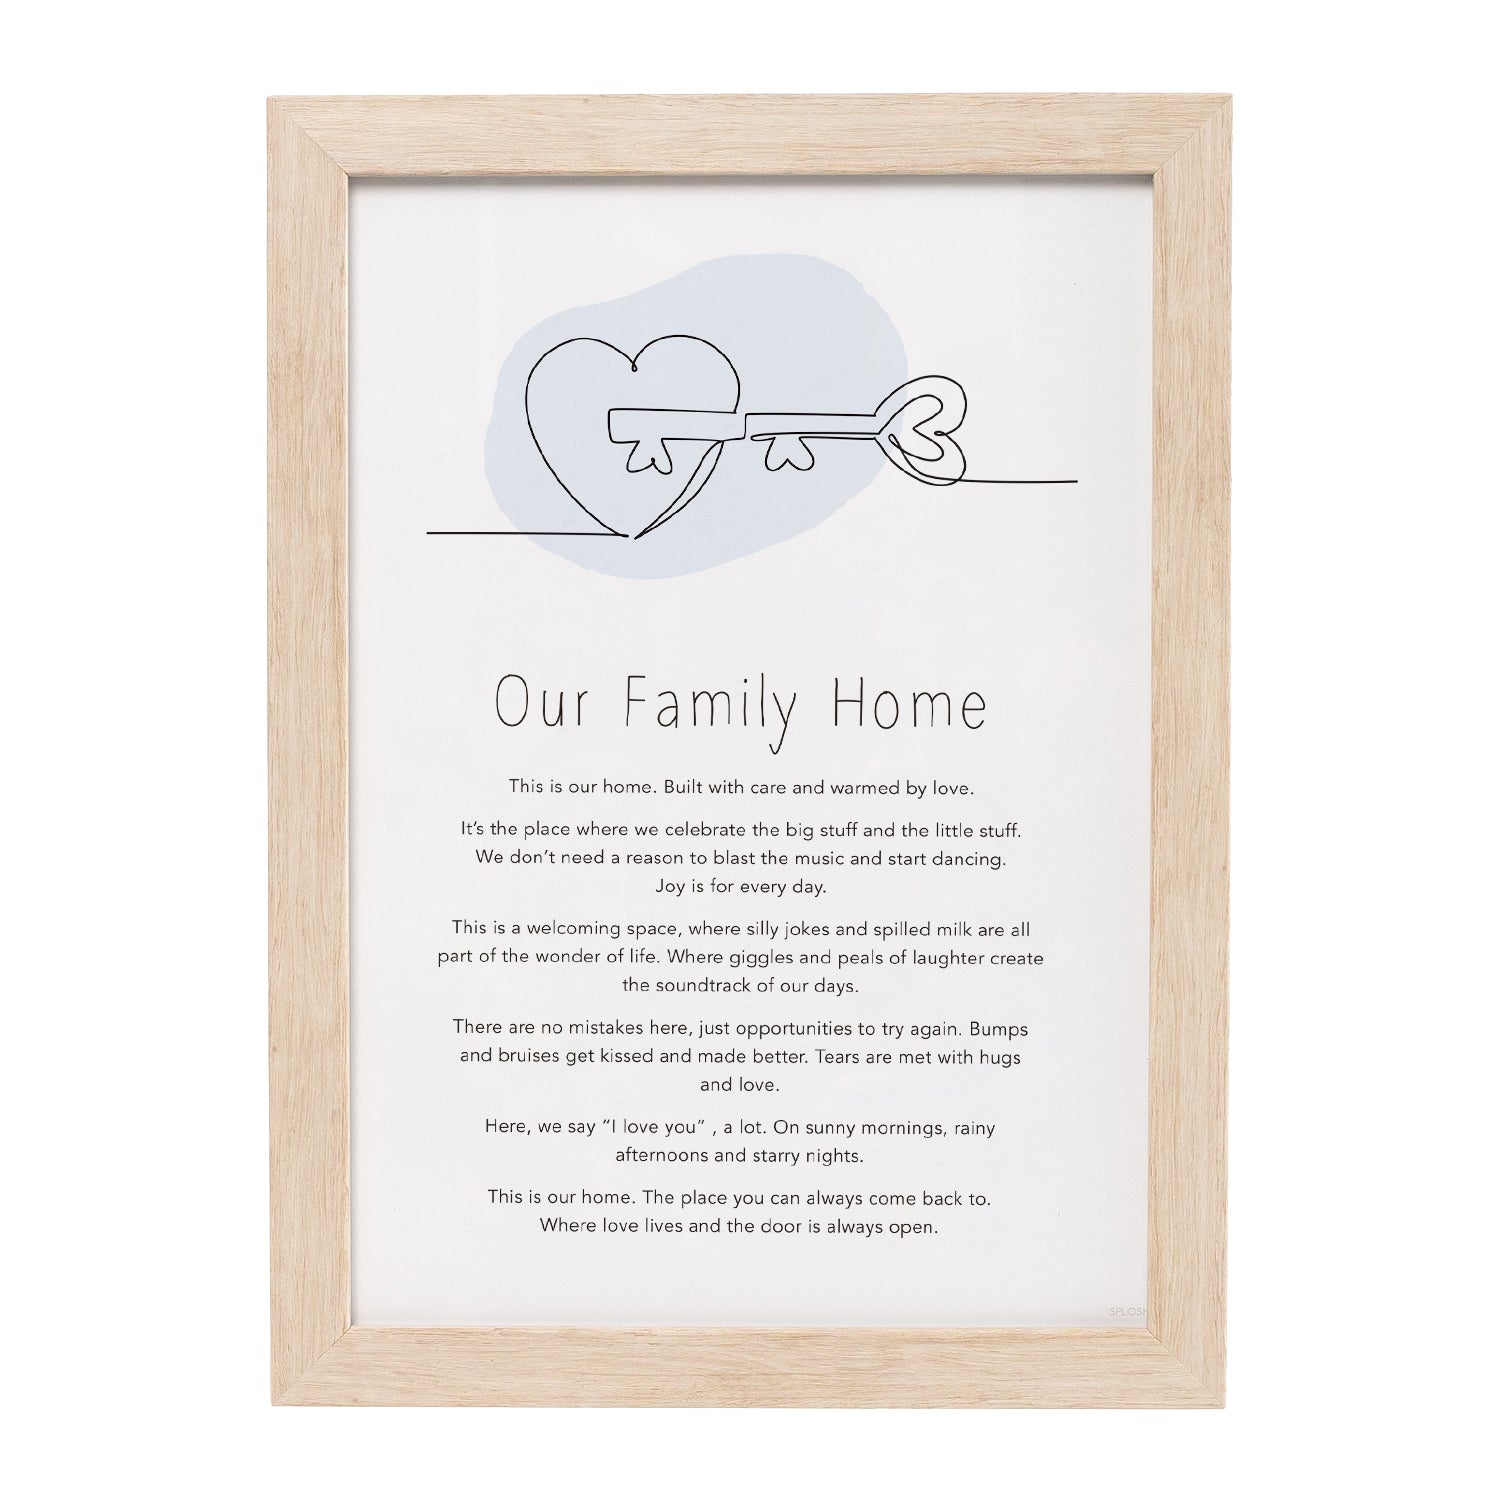 GIFT OF WORDS WOODEN FRAME "OUR FAMILY HOME"